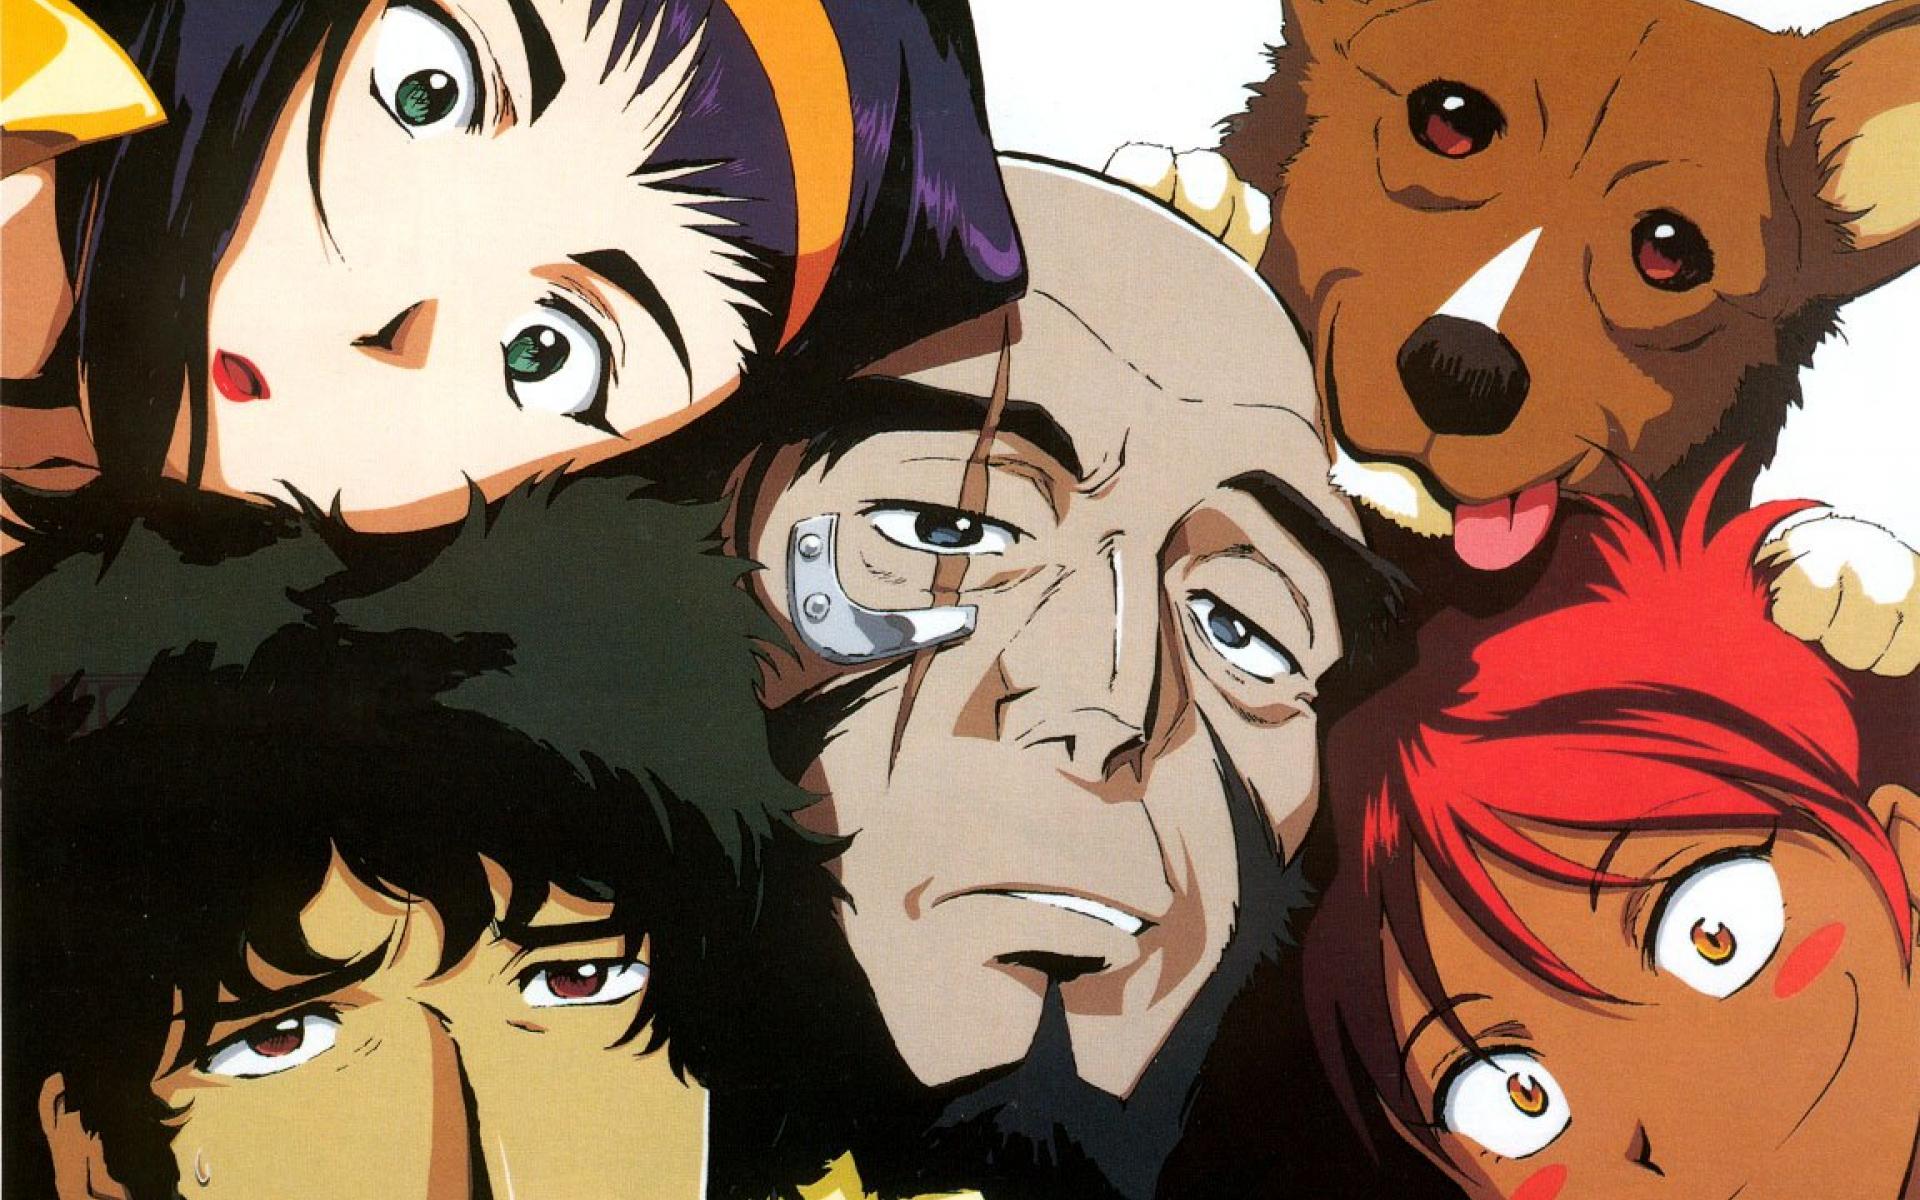 140 Retro Anime That Should Be Brought Back From Oblivion | Bored Panda